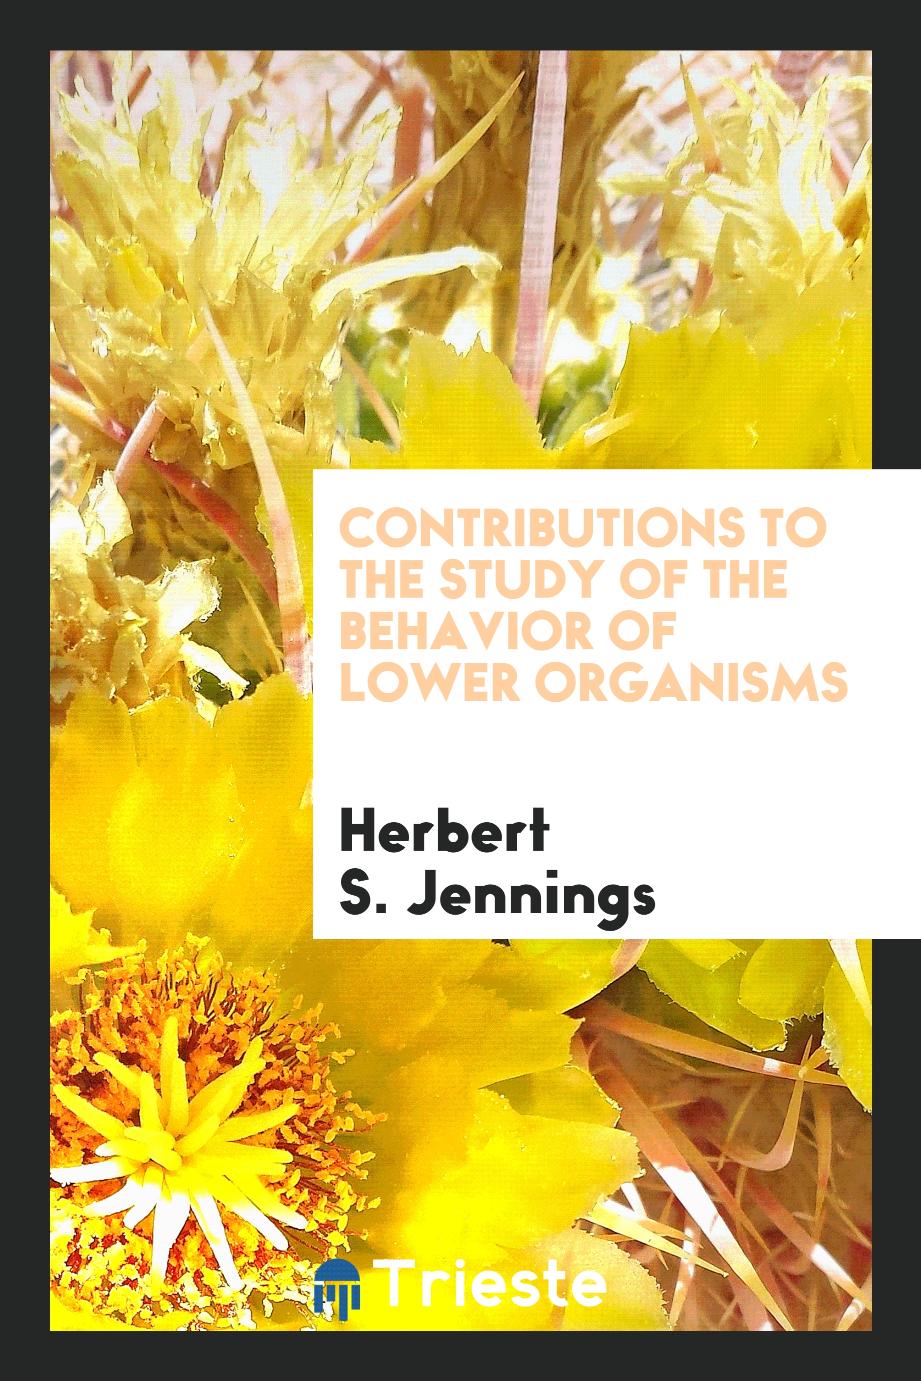 Contributions to the study of the behavior of lower organisms